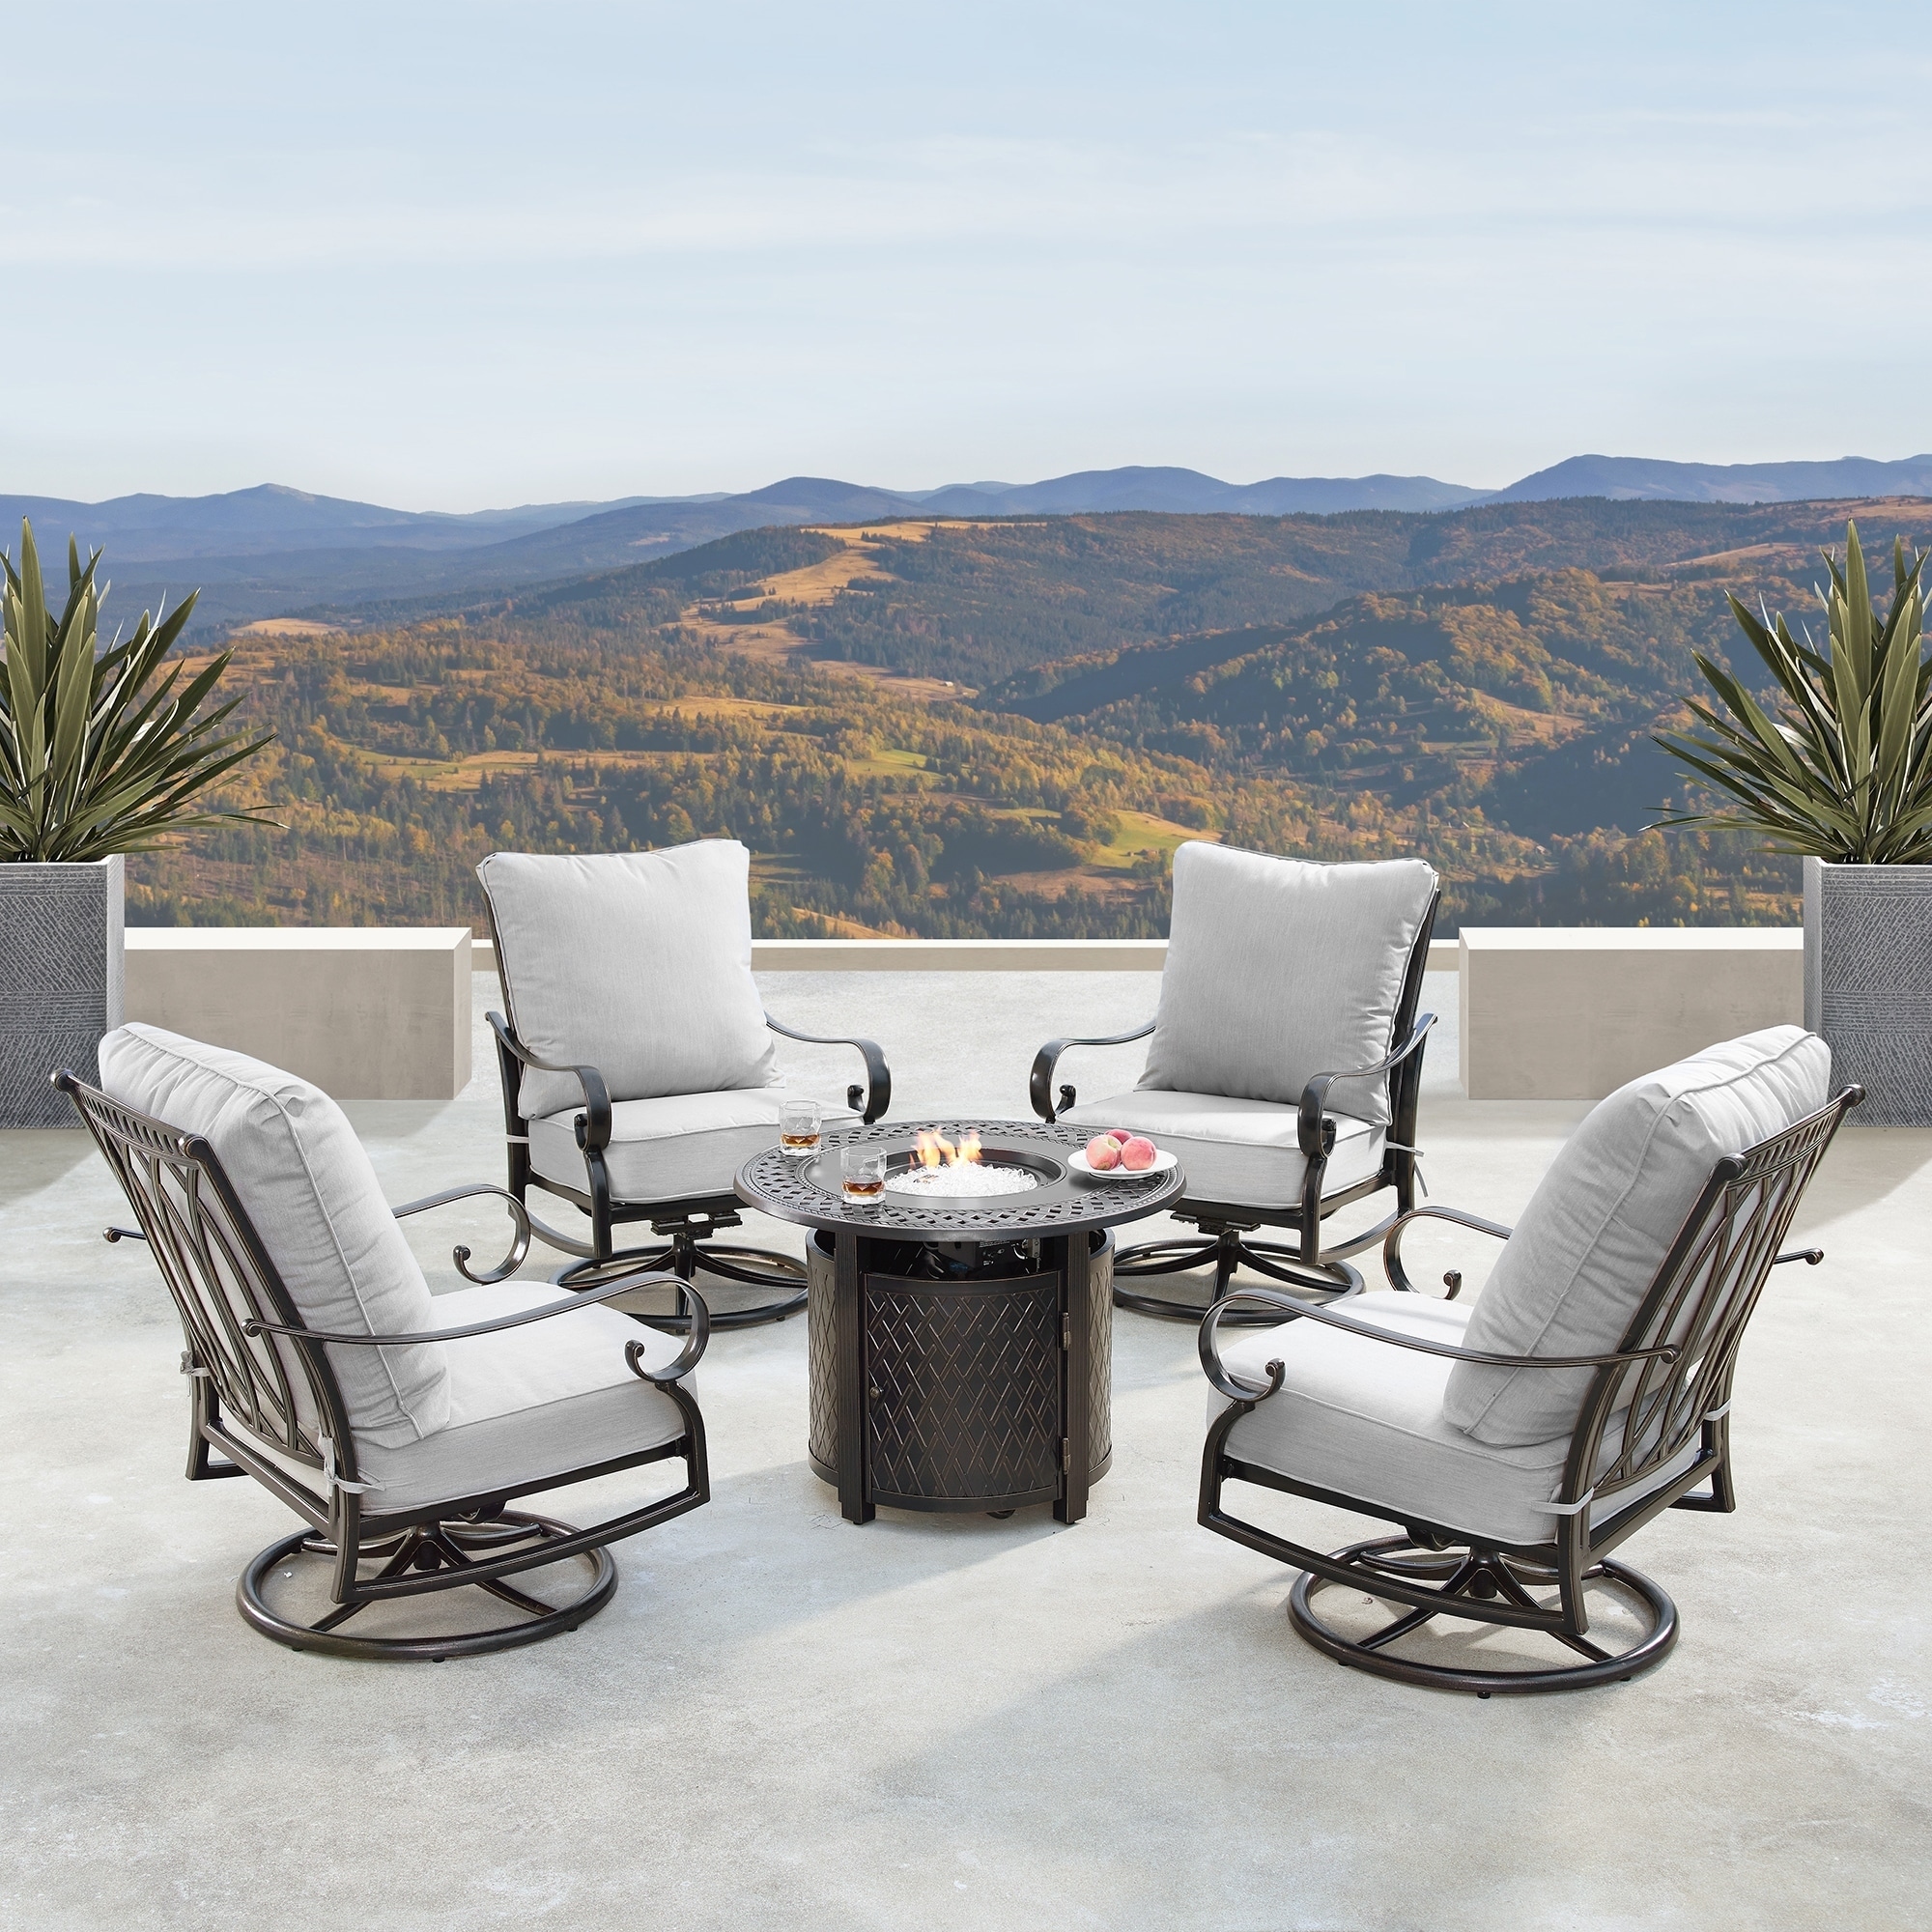 Outdoor Aluminum 34 In. Round Fire Table Set With Four Deep Seating Swivel Rocking Chairs  Fire Beads  Lid And Fabric Cover